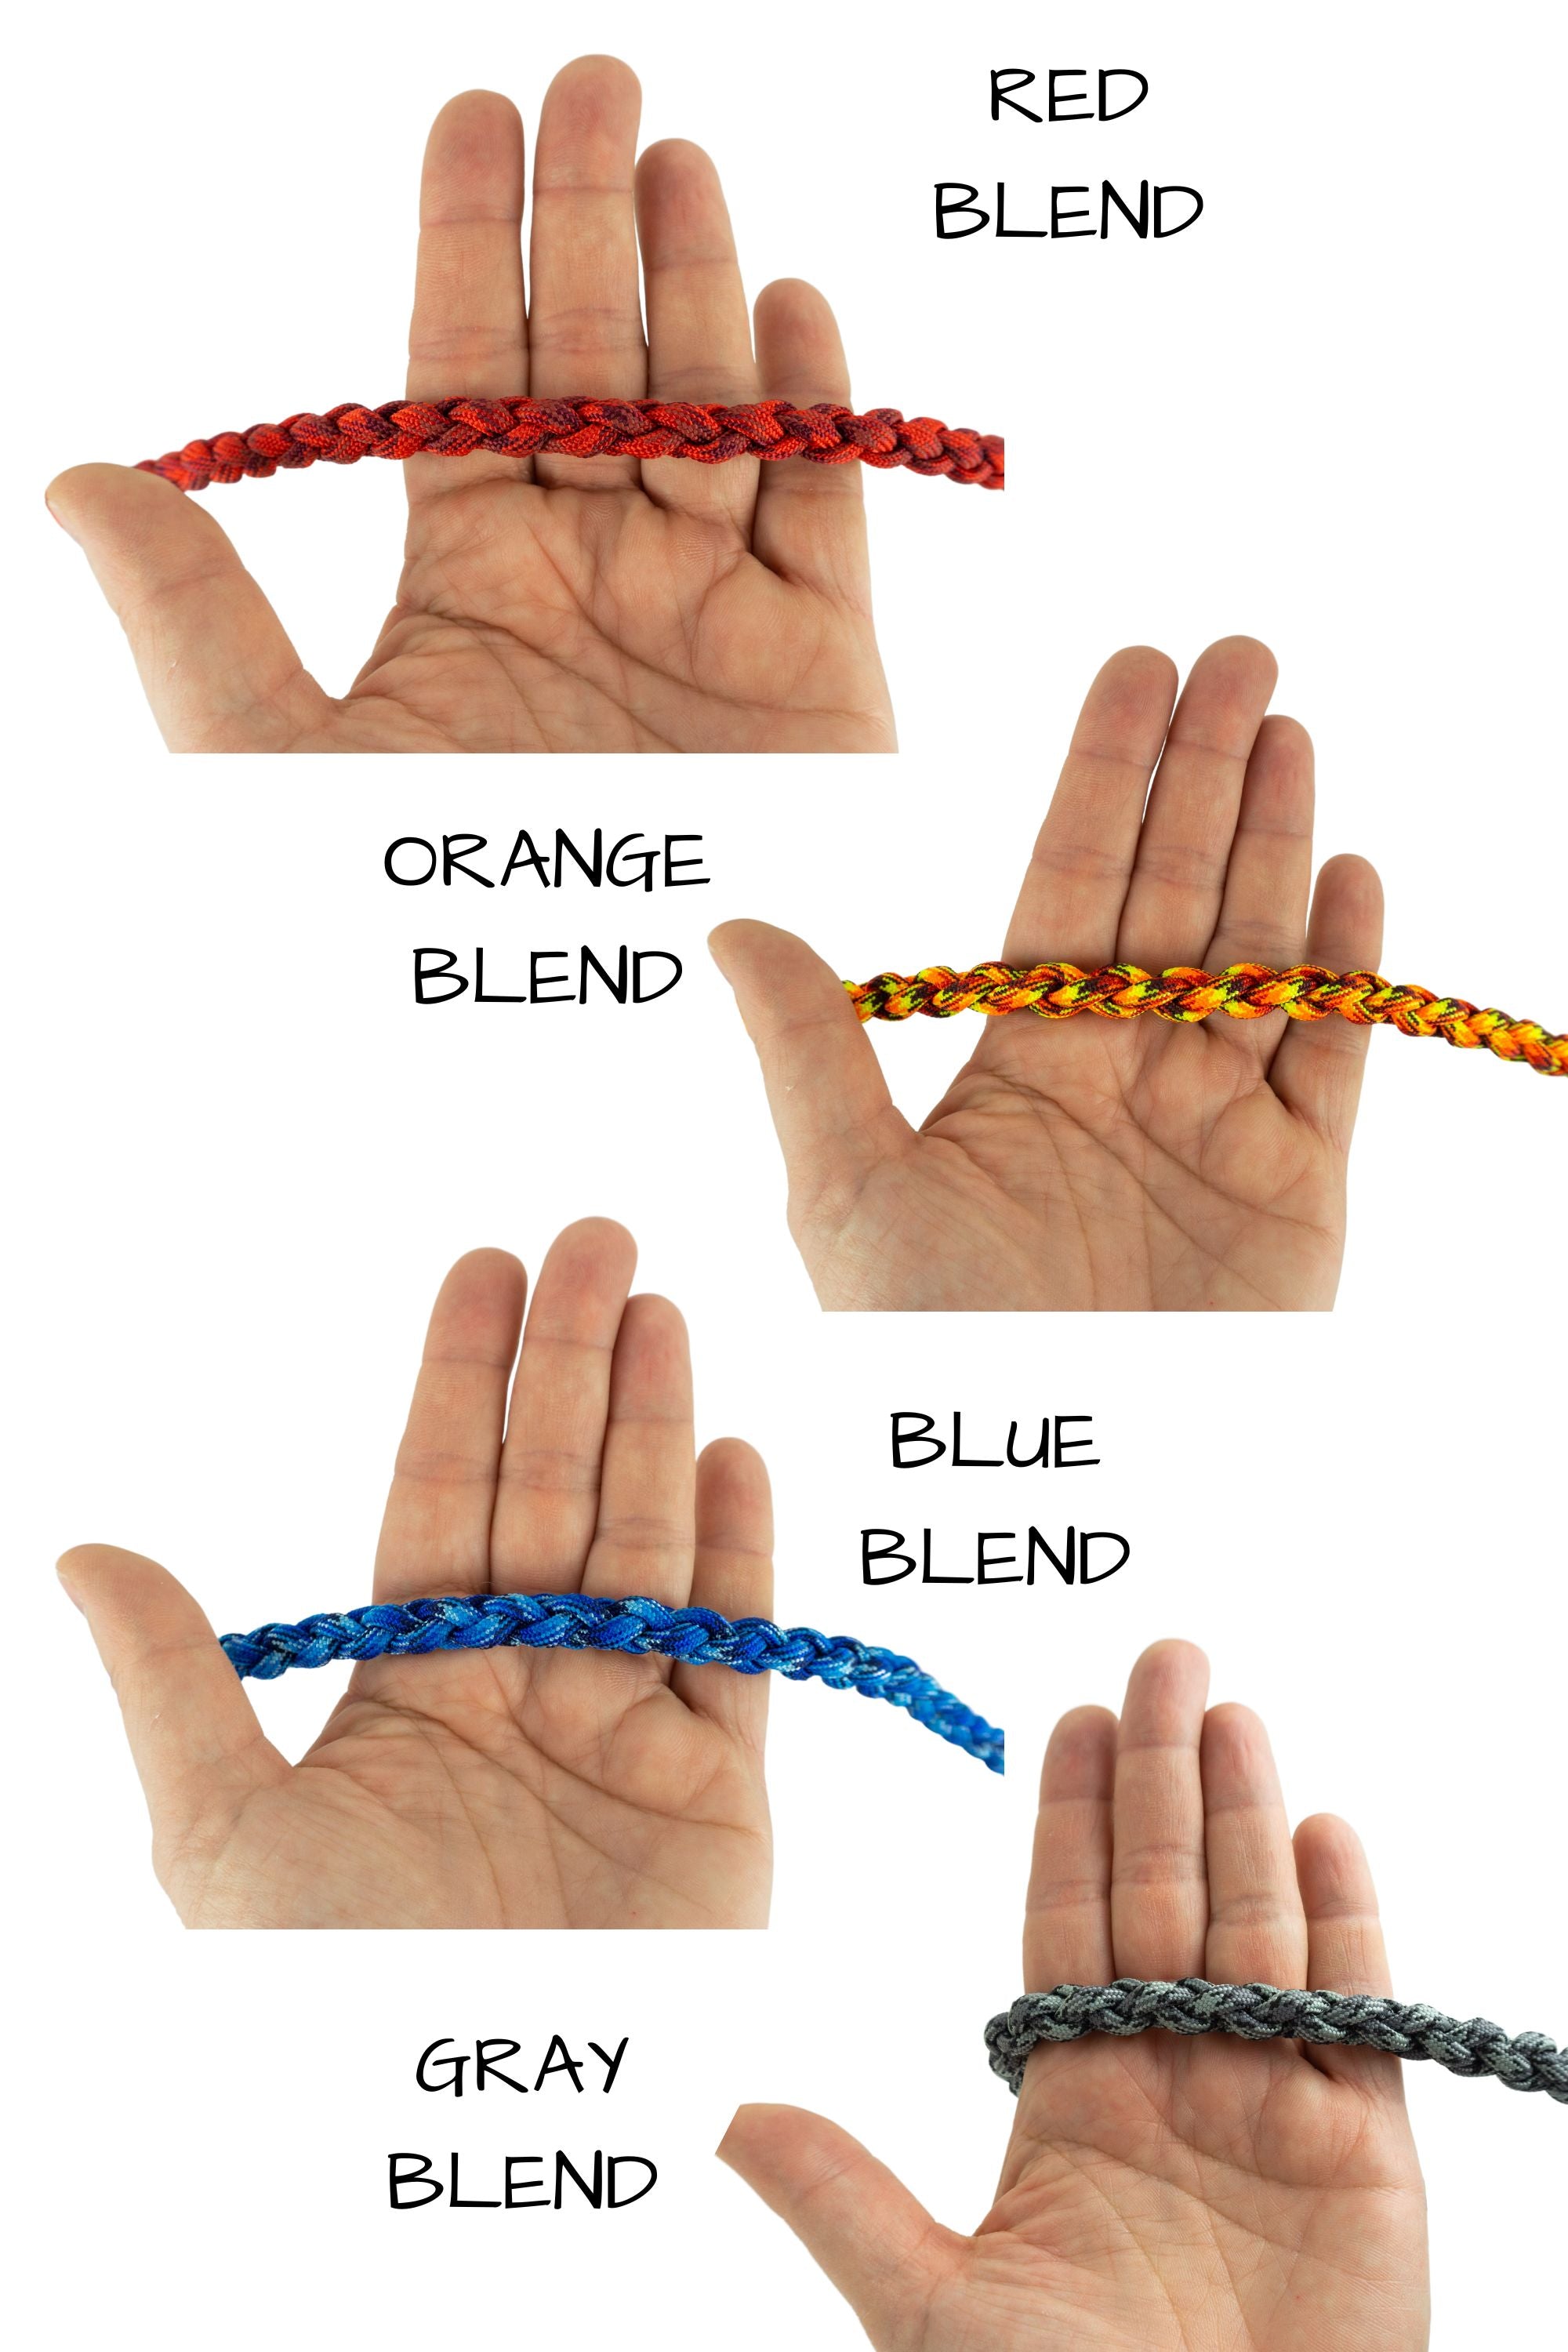 color samples of paracord braid shown for scale in the palm of a hand. Colors shown here are red blend, orange blend, blue blend, or gray blend